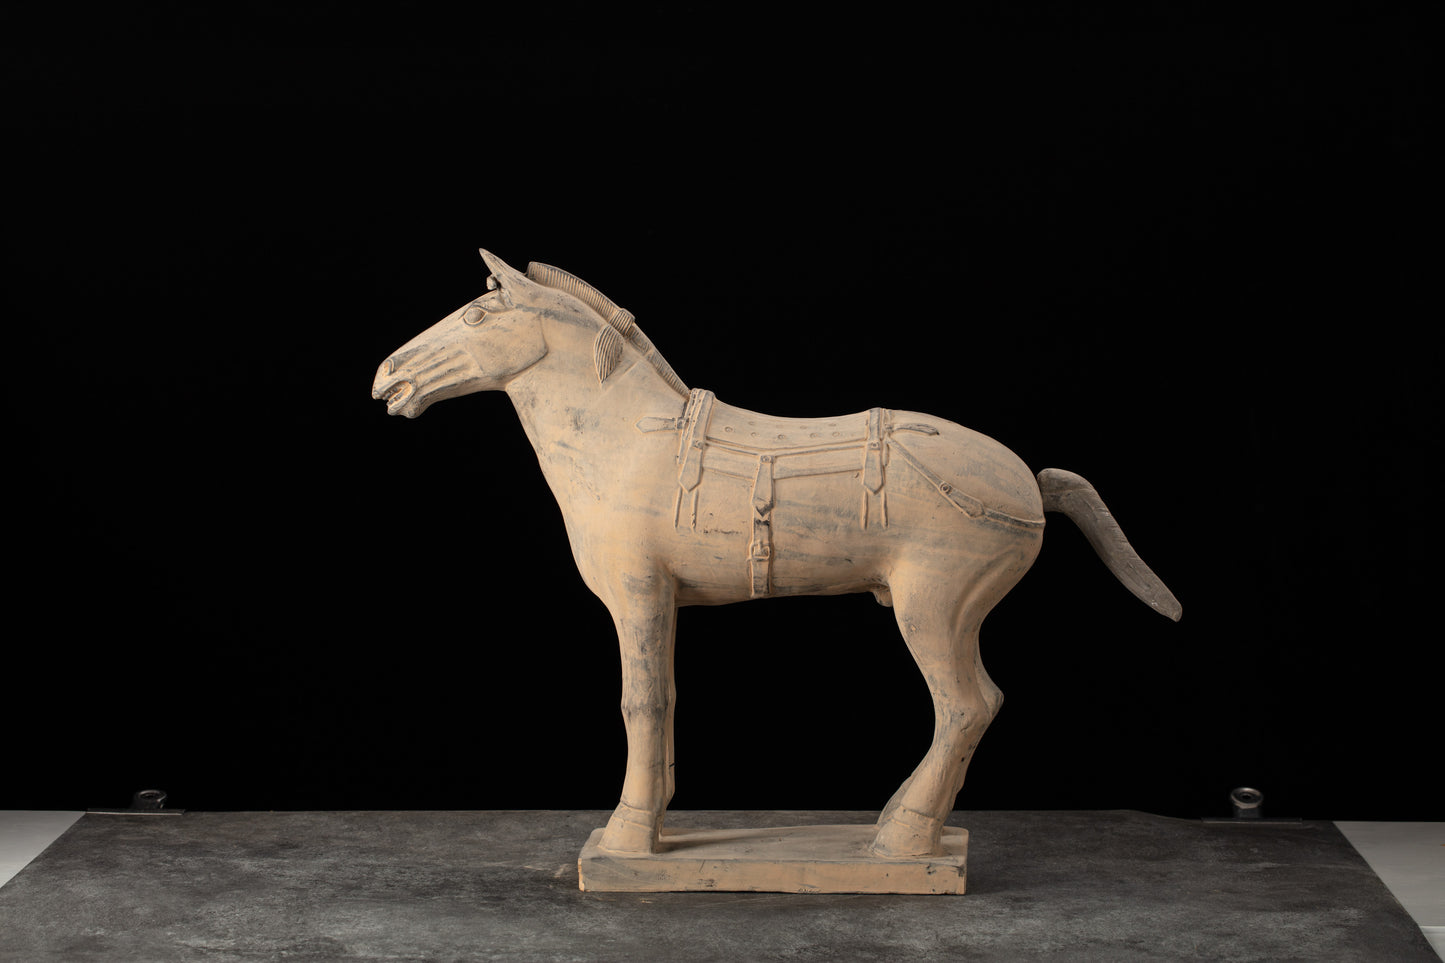 55CM Horse - CLAYARMY -Profile shot emphasizing the majestic posture and intricate patterns of our 55CM Clayarmy Terracotta Horse.